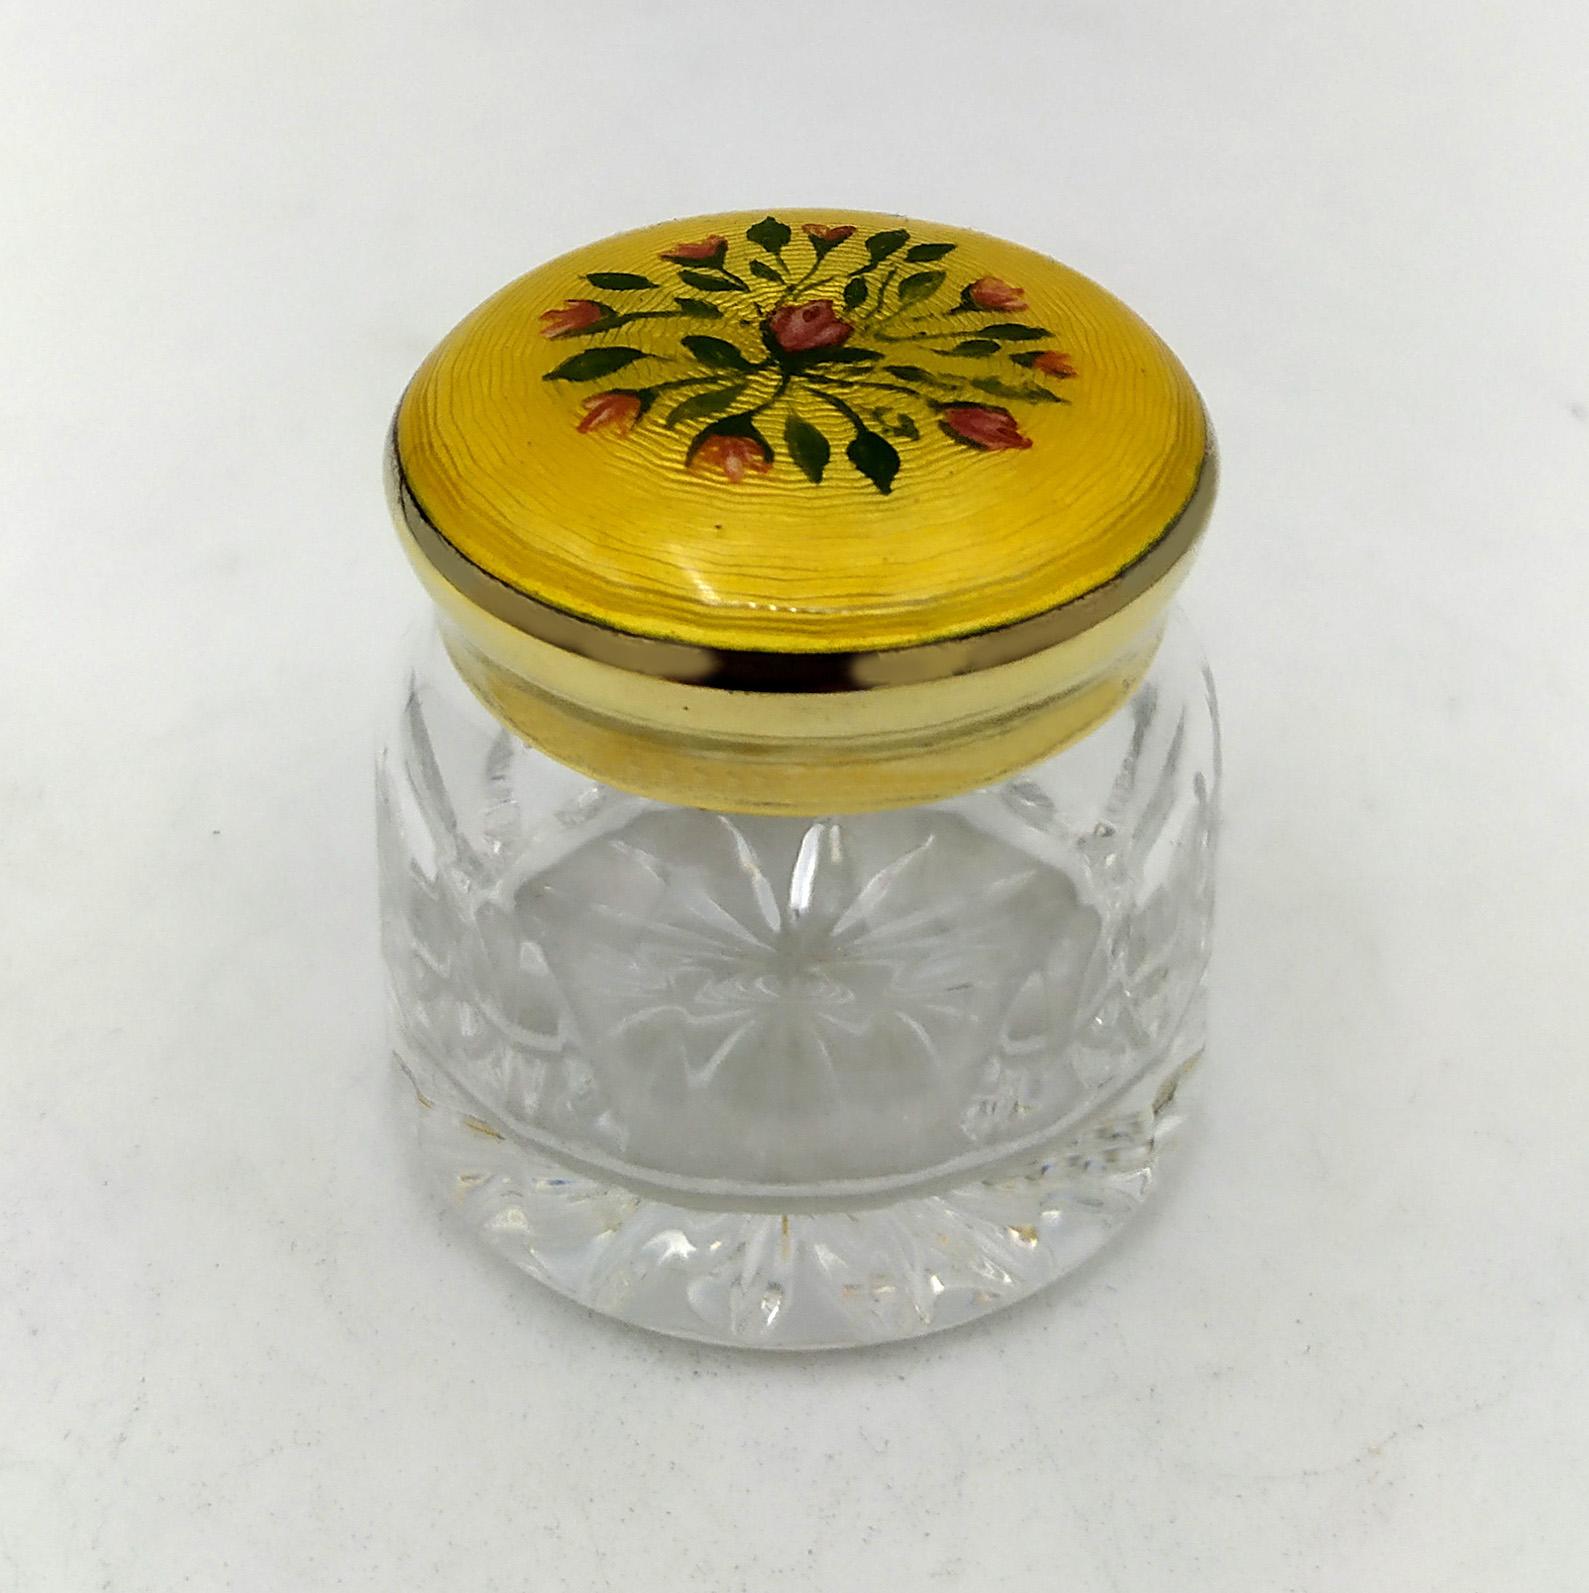 Round favor Box lid in Sterling Silver Light yellow floral miniature Salimbeni.
Wedding favor or small container in cut crystal and lid in 925/1000 sterling silver gold plated with translucent fired enamel on guillochè and hand-painted floral